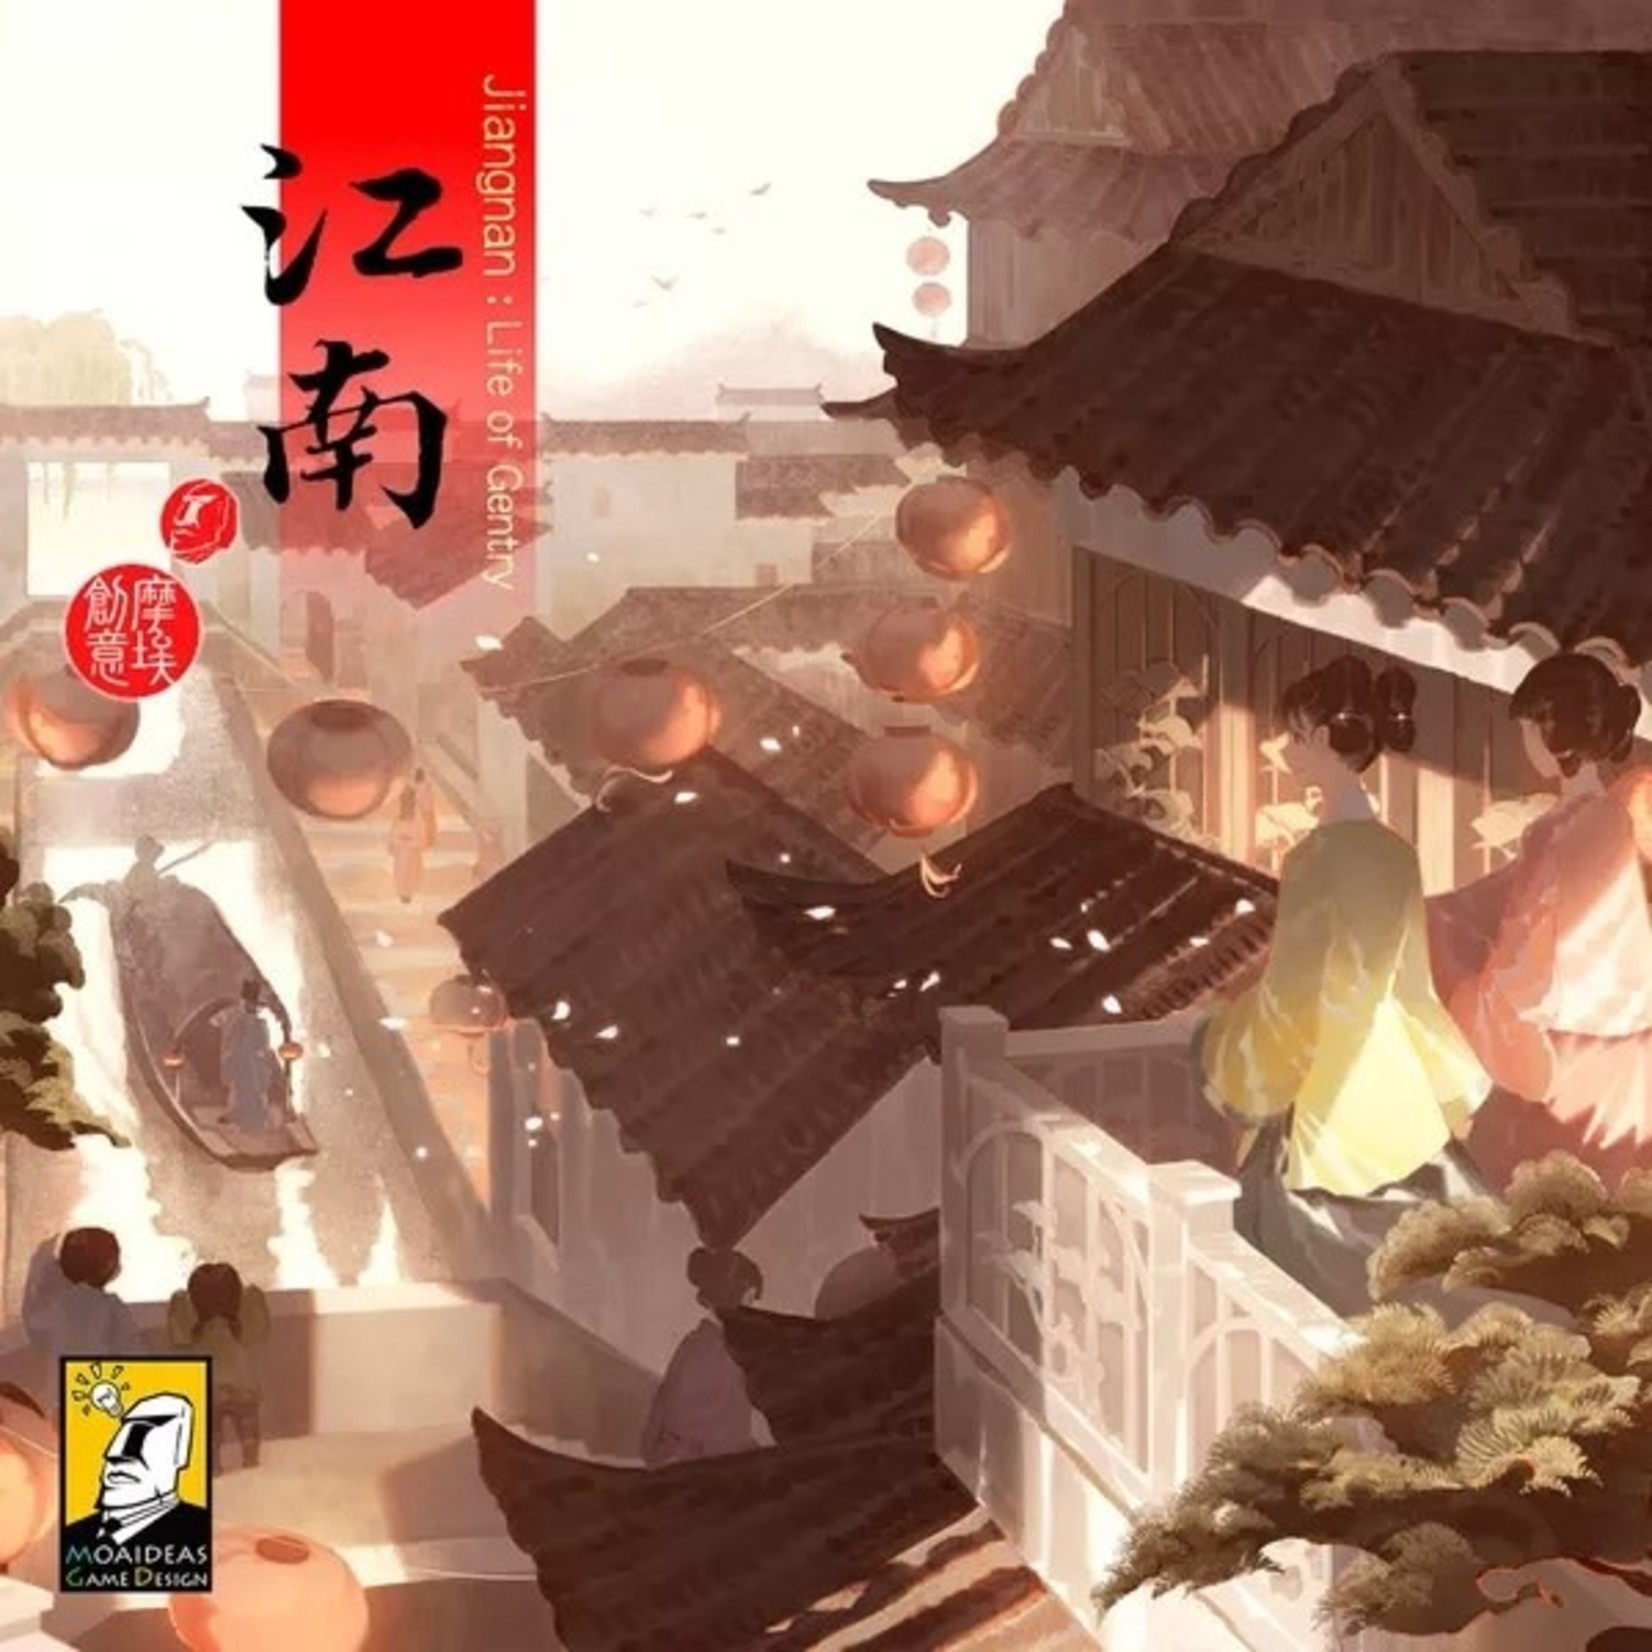 Moaideas Game Design Jiangnan Life of Gentry Deluxe KS